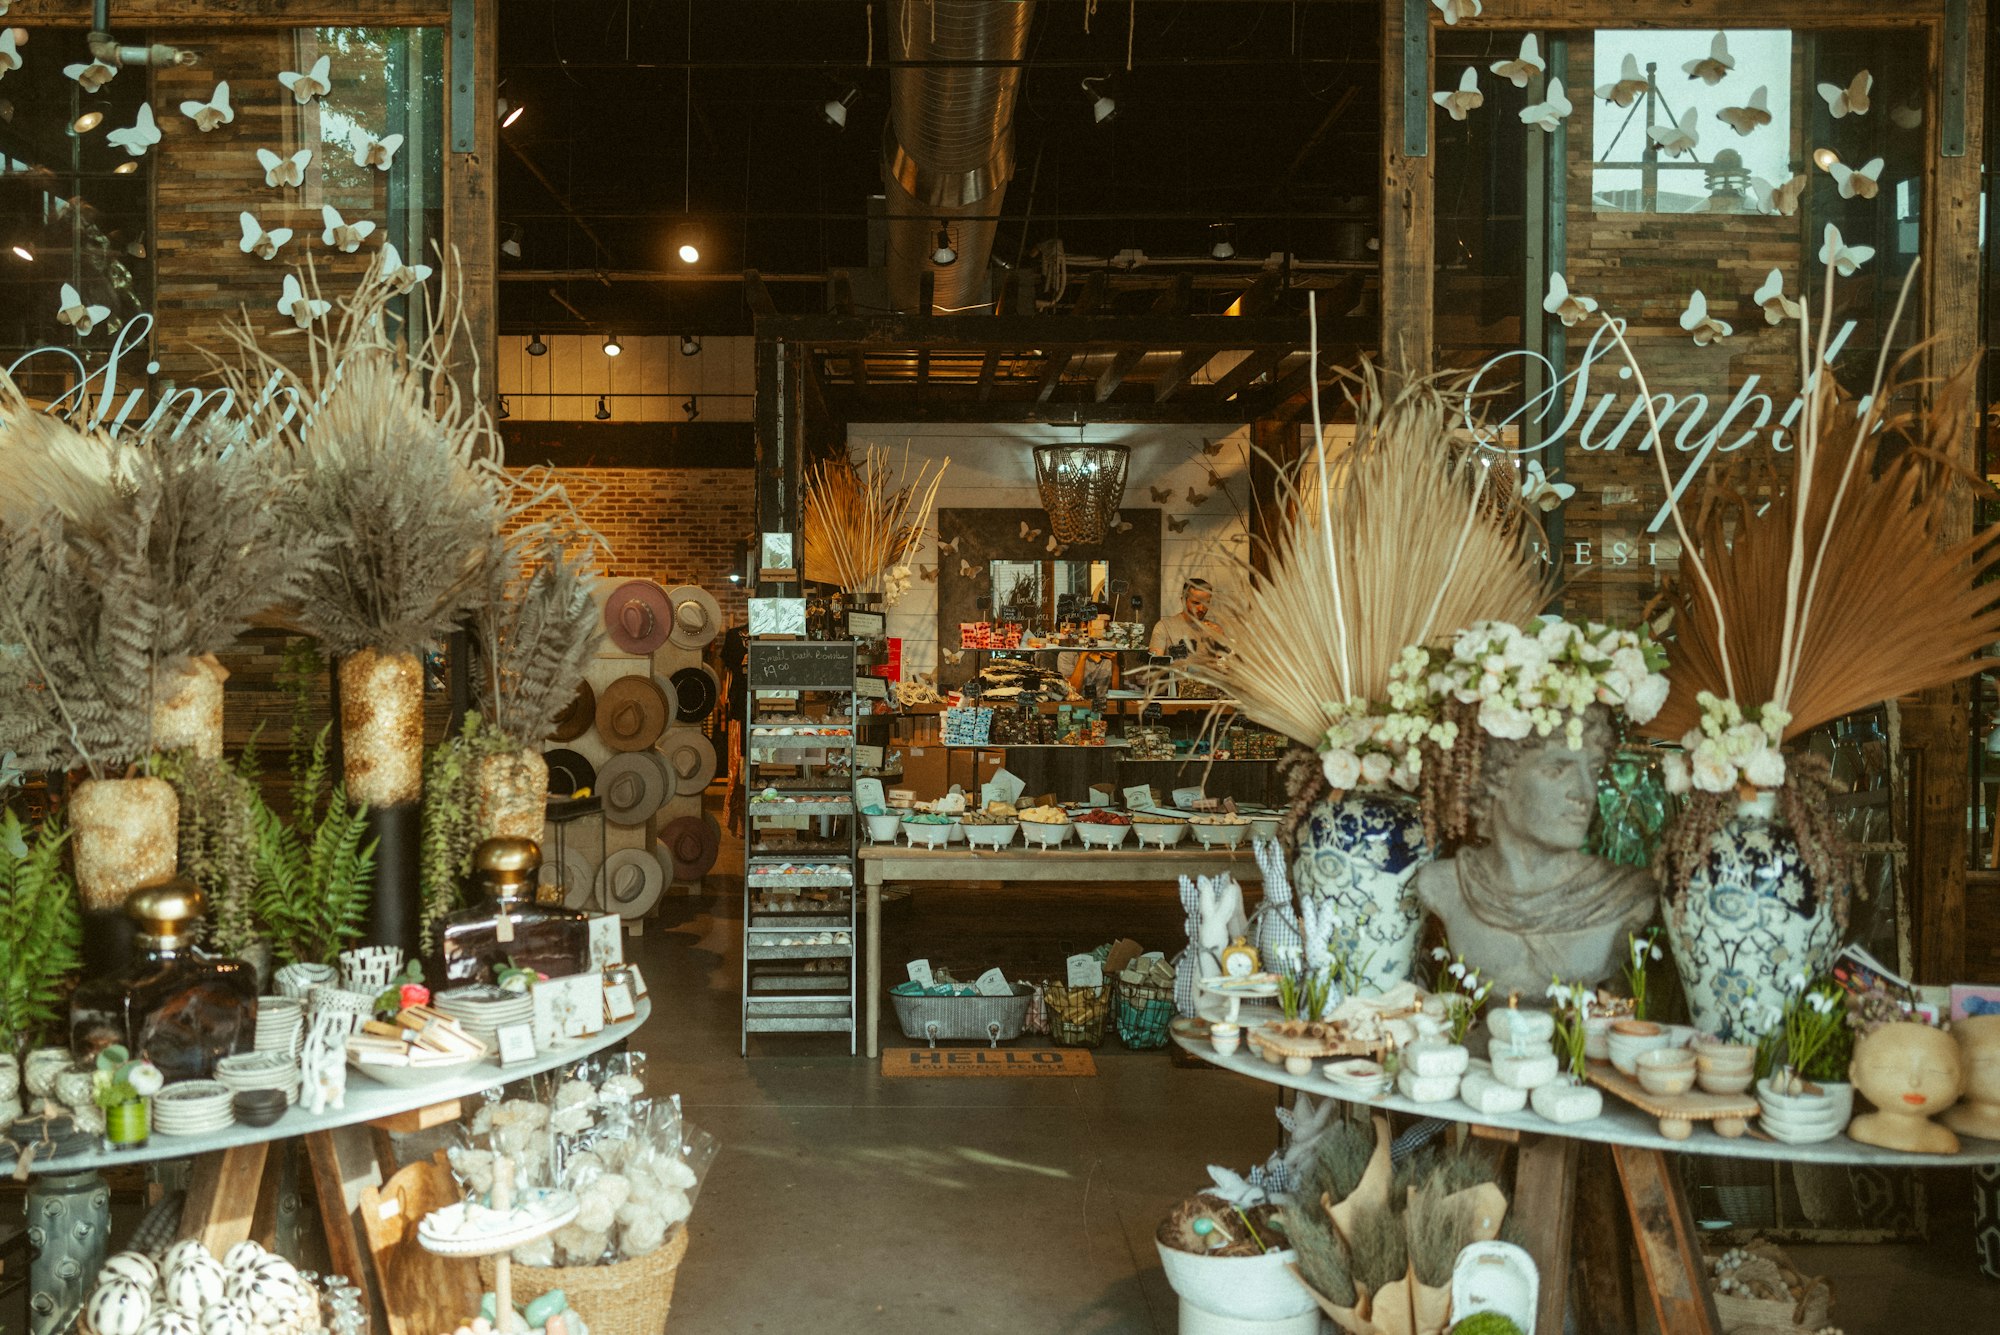 A picturesque retail store location selling candles, soaps, and home decor